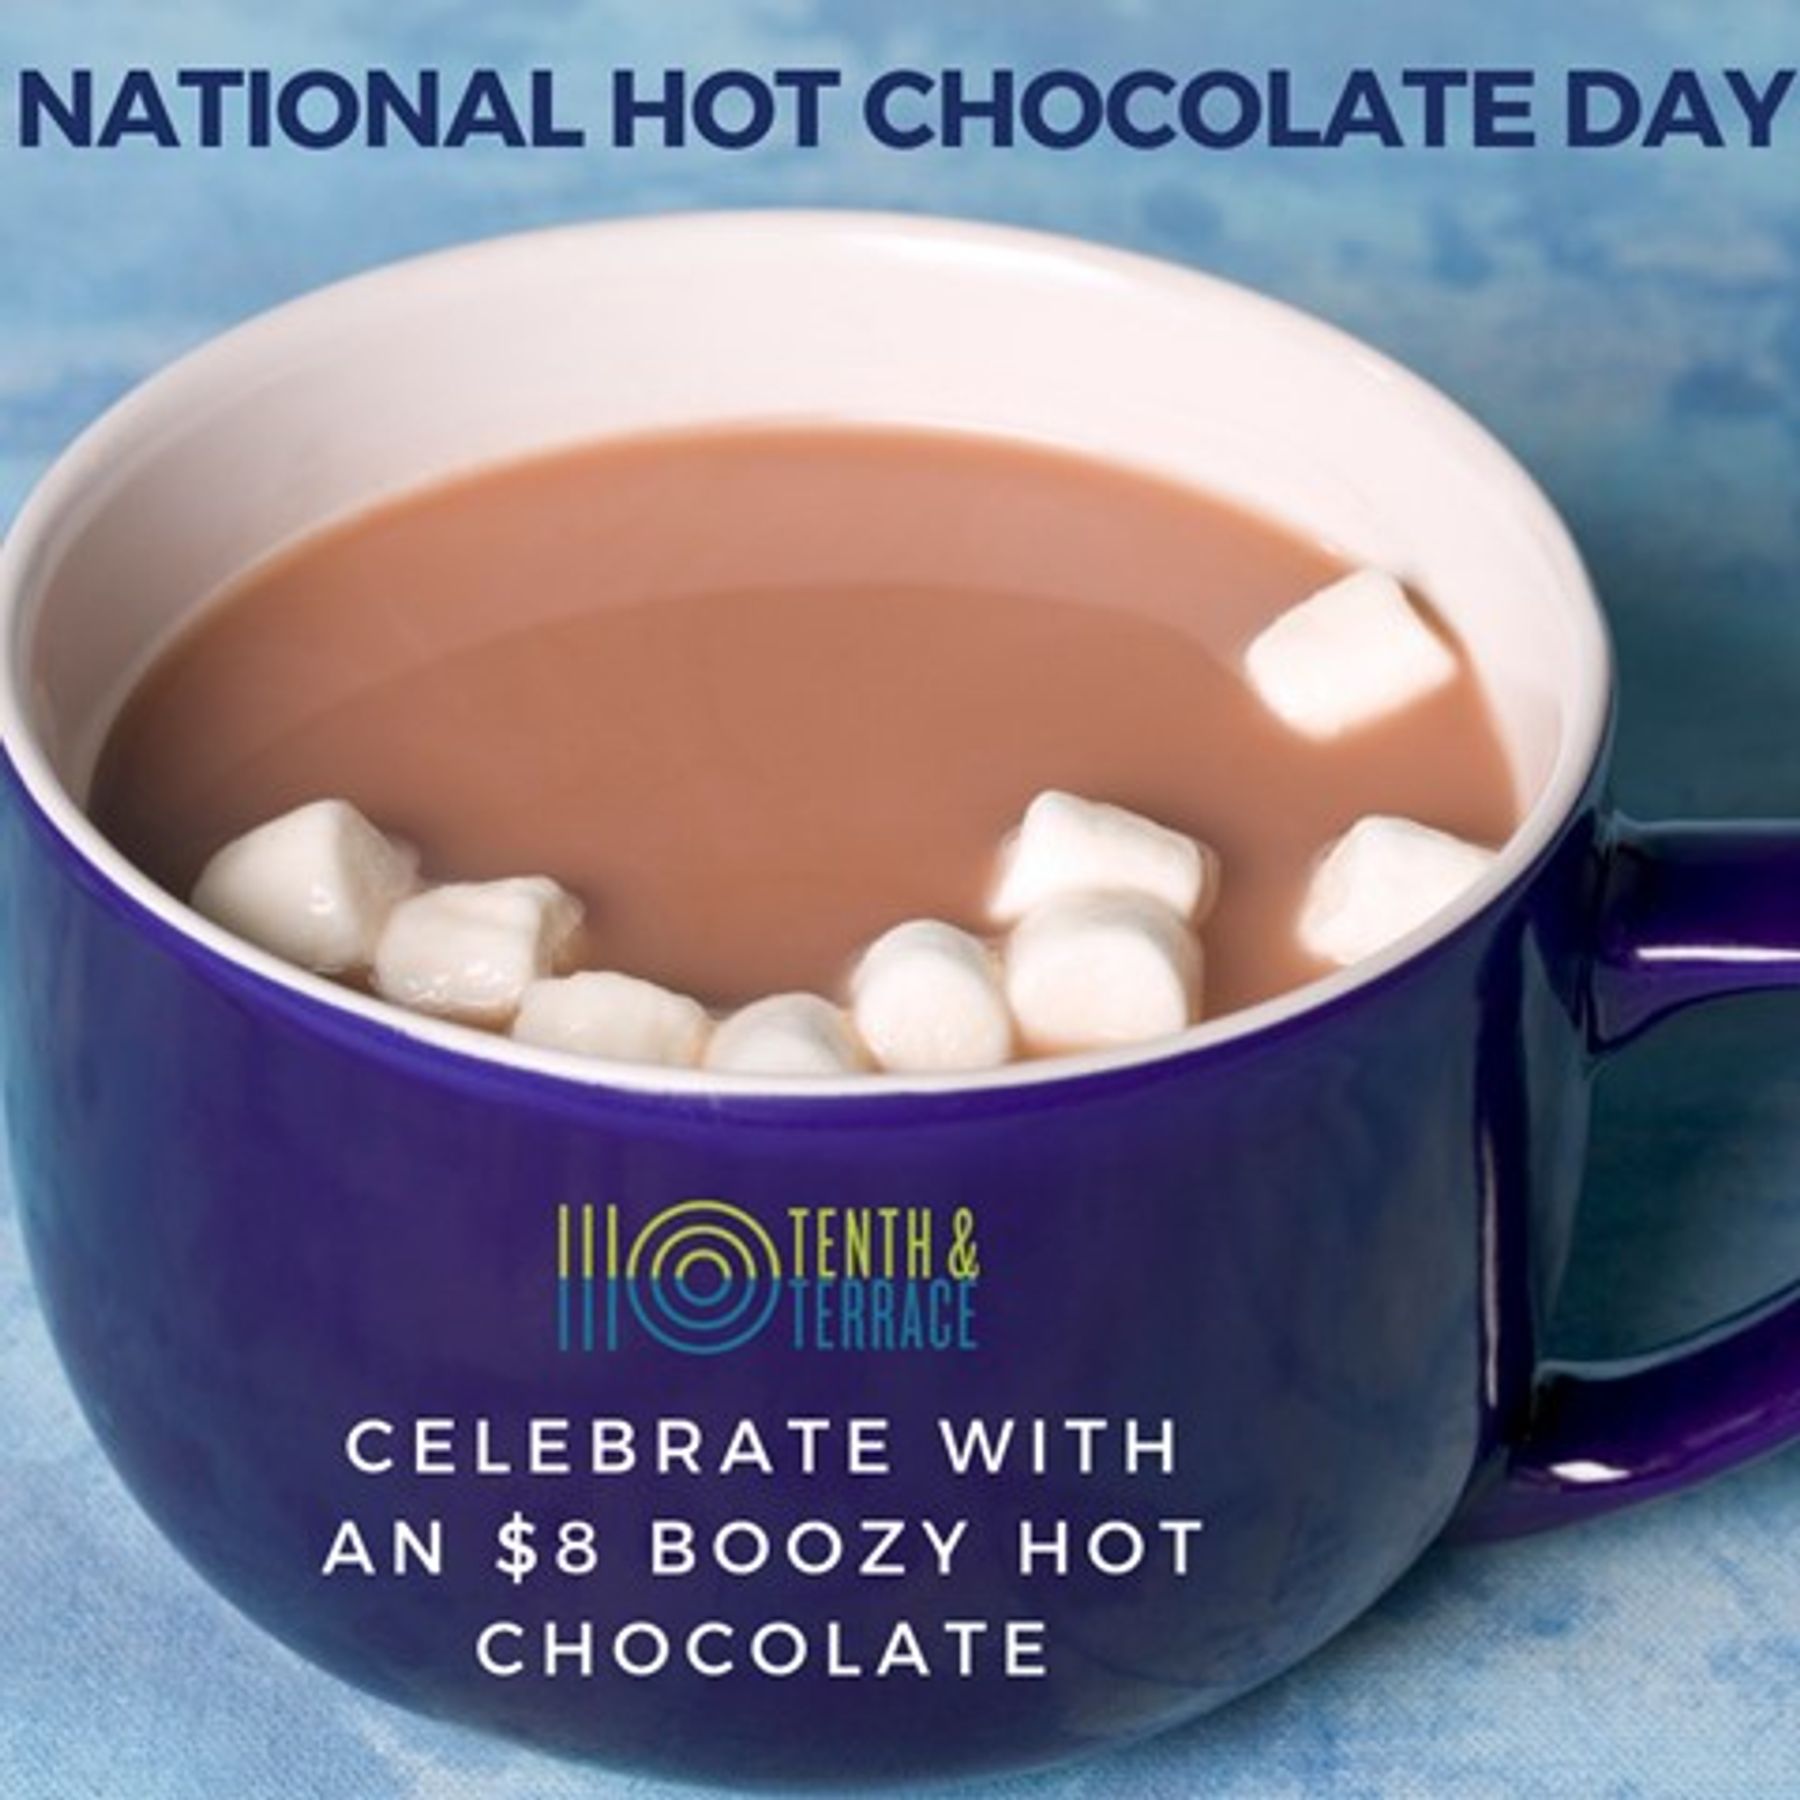 National Hot Chocolate Day at 10th & Terrace Downtown Raleigh, NC